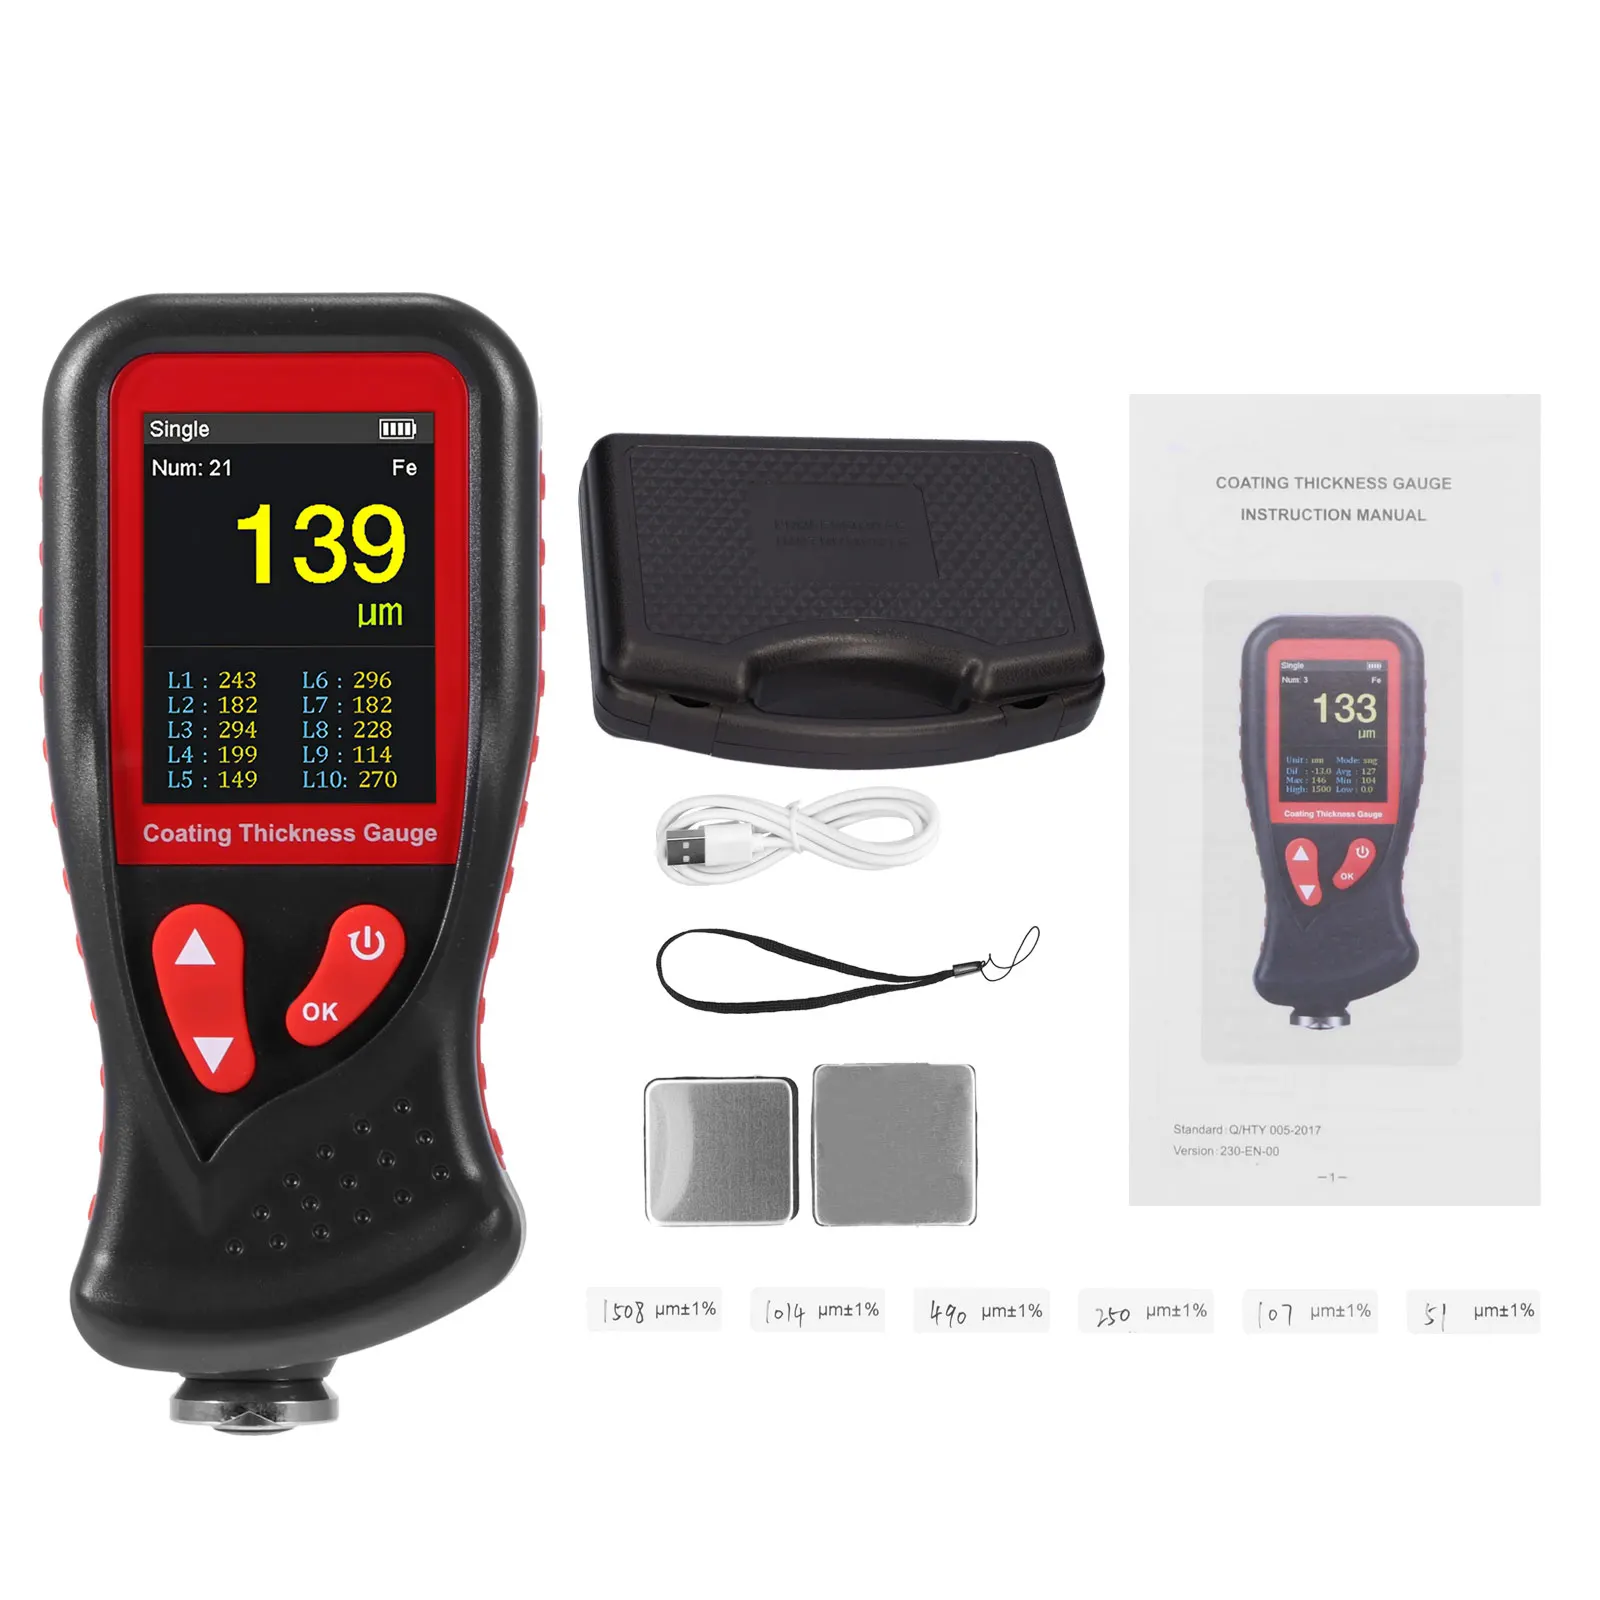 

GT230 Coating Thickness Gauge Car Film Digital Thickness Gauge Tester 0-1300um LCD Rechargeable Body Paint Thickness Meter